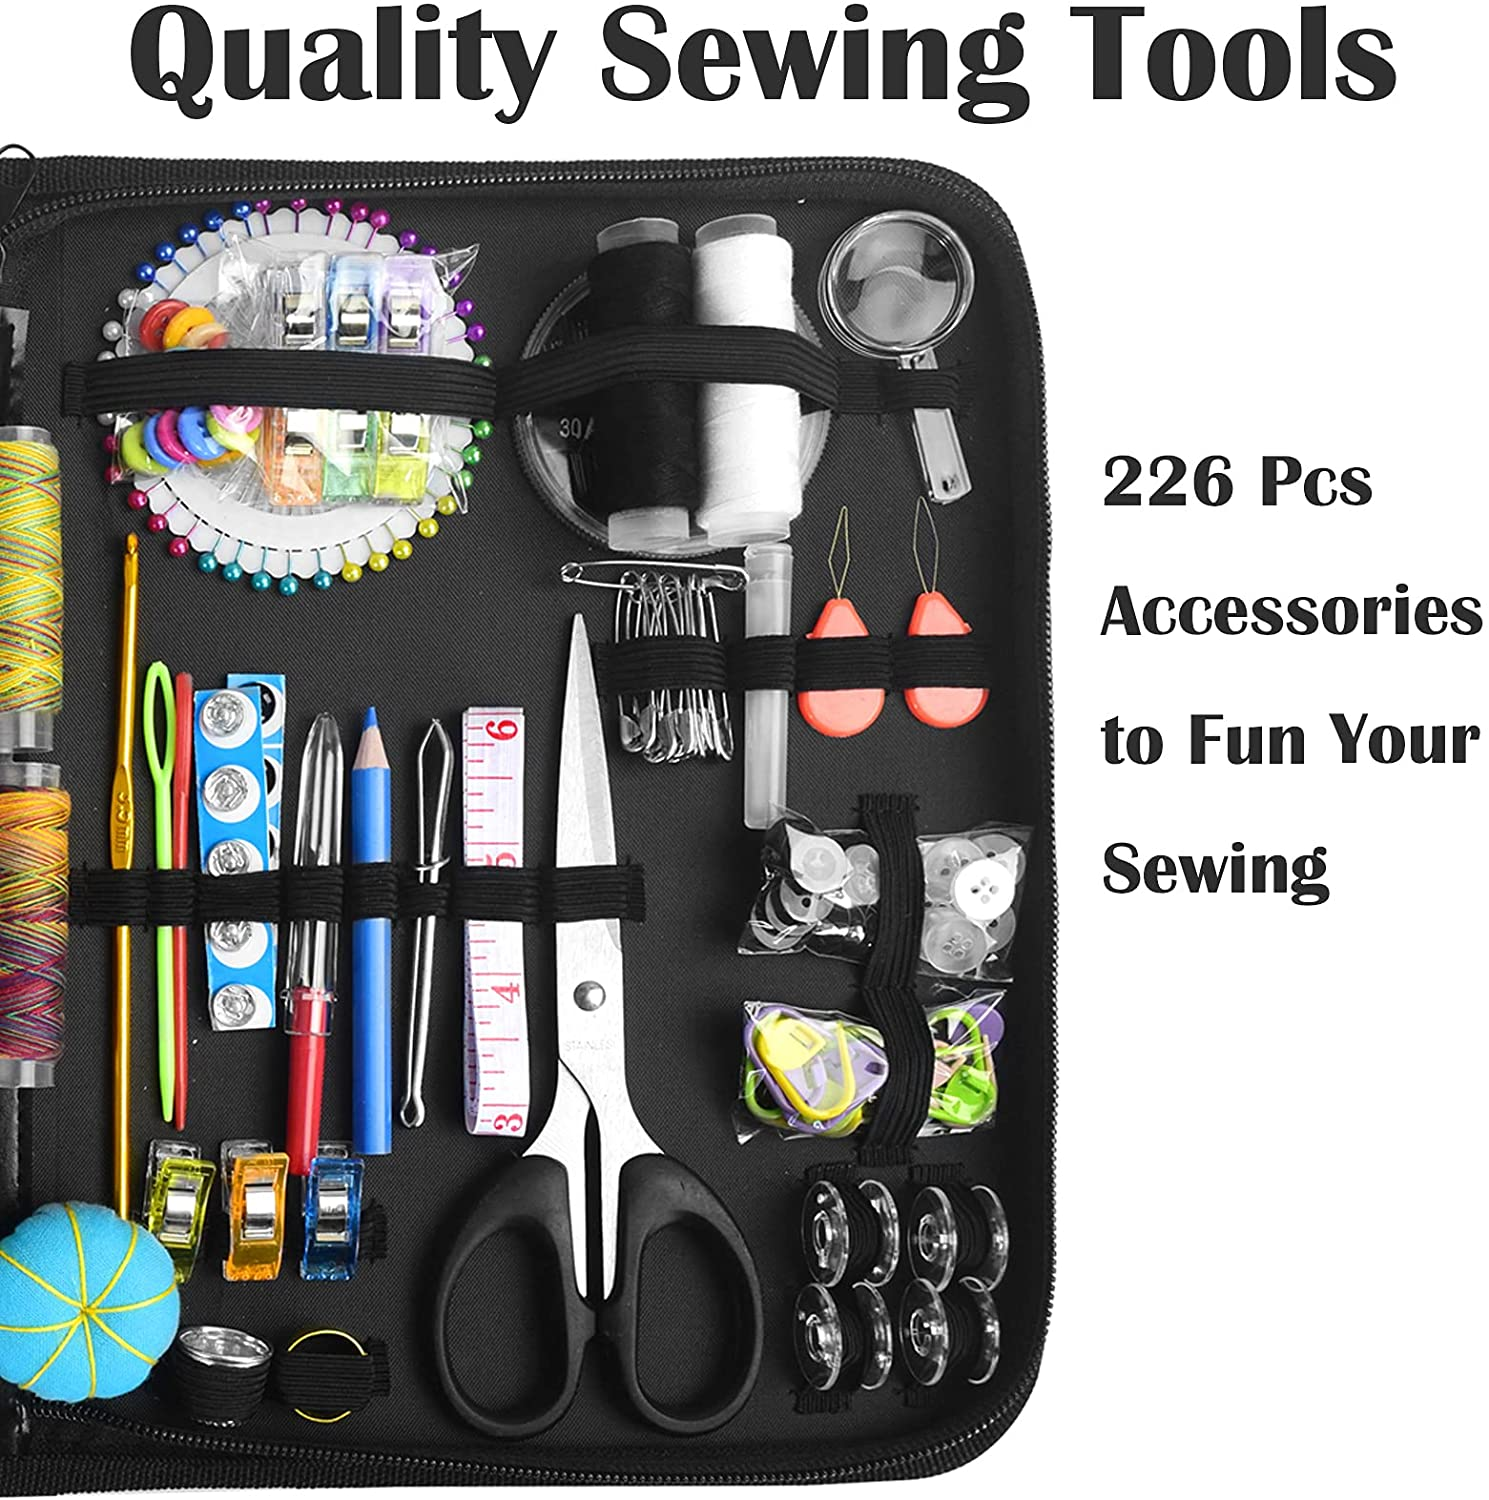 Oumloh Sewing Kit 226 Pcs XL Sewing Supplies for DIY Traveler Adults Beginner Emergency DIY Sewing Supplies Organizer Filled with Scissors, Thimble, Thread, Sewing Needles